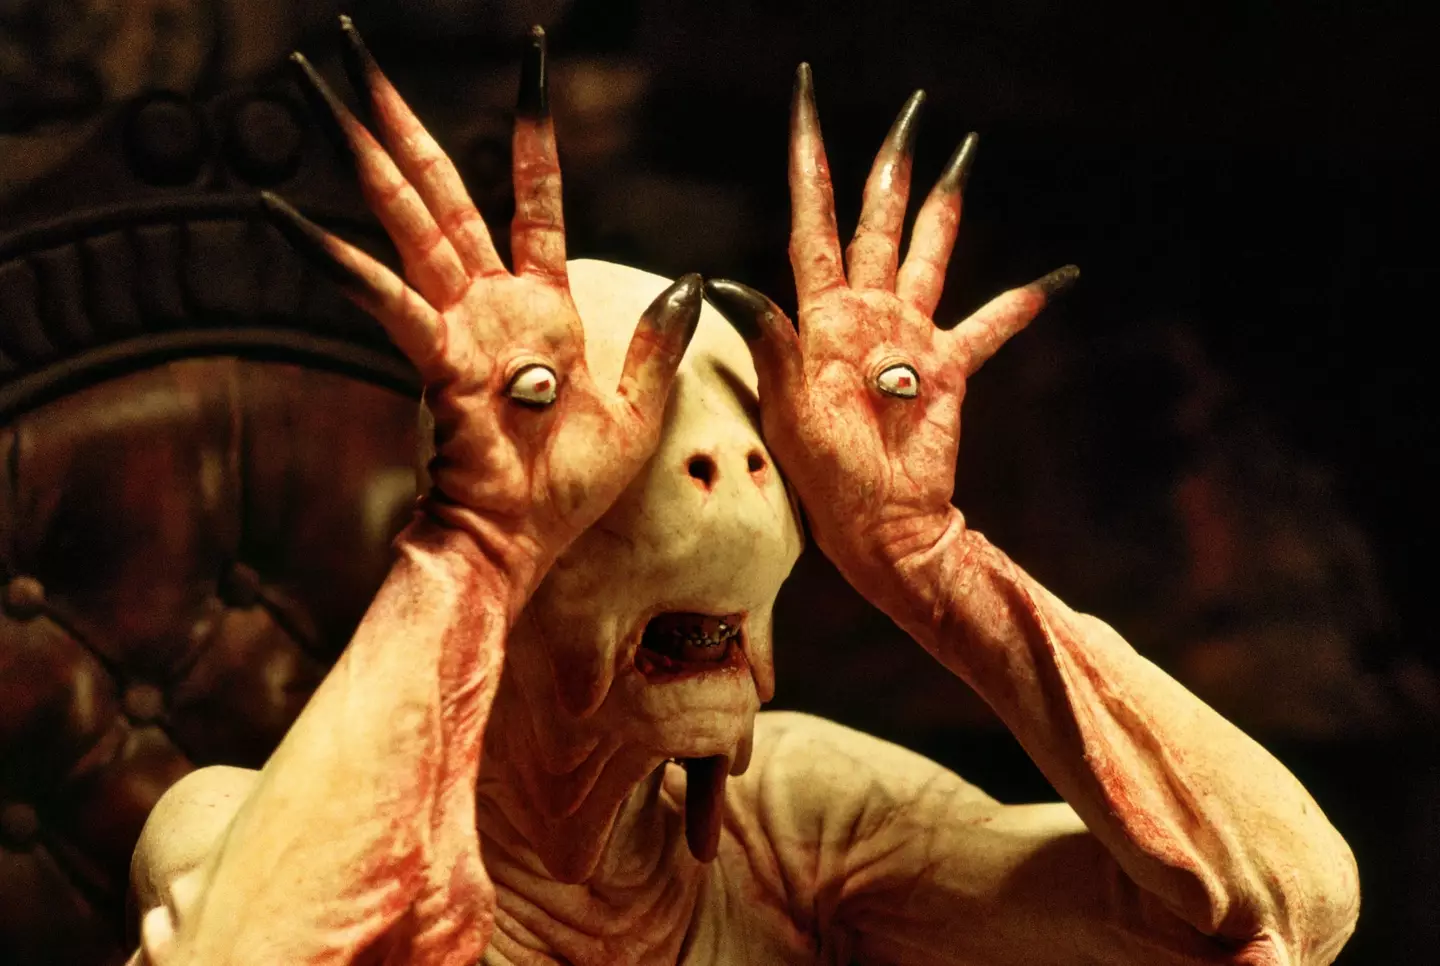 Pan's Labyrinth is a classic.